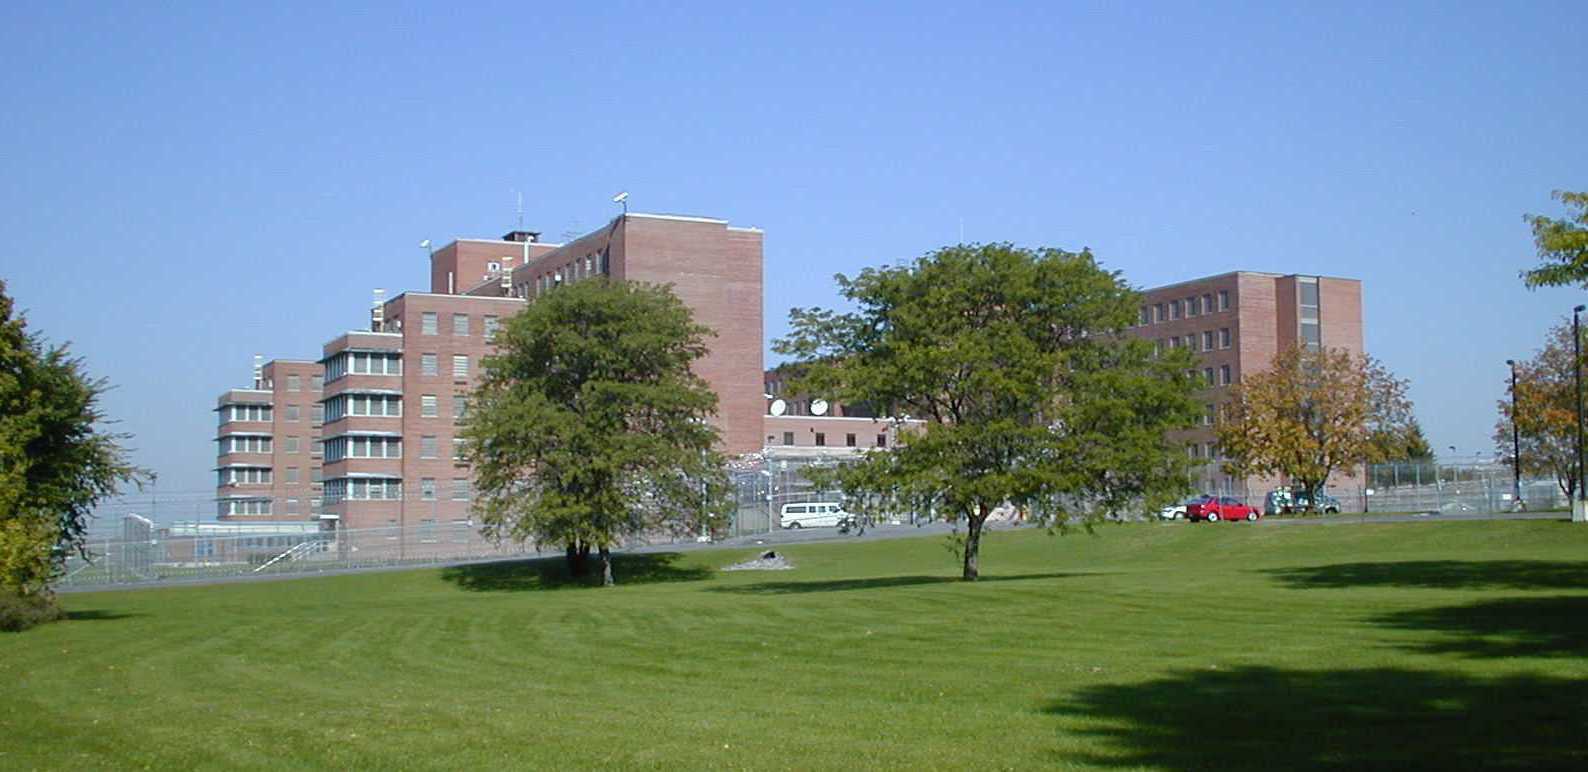 Employment at Central New York Psychiatric Center